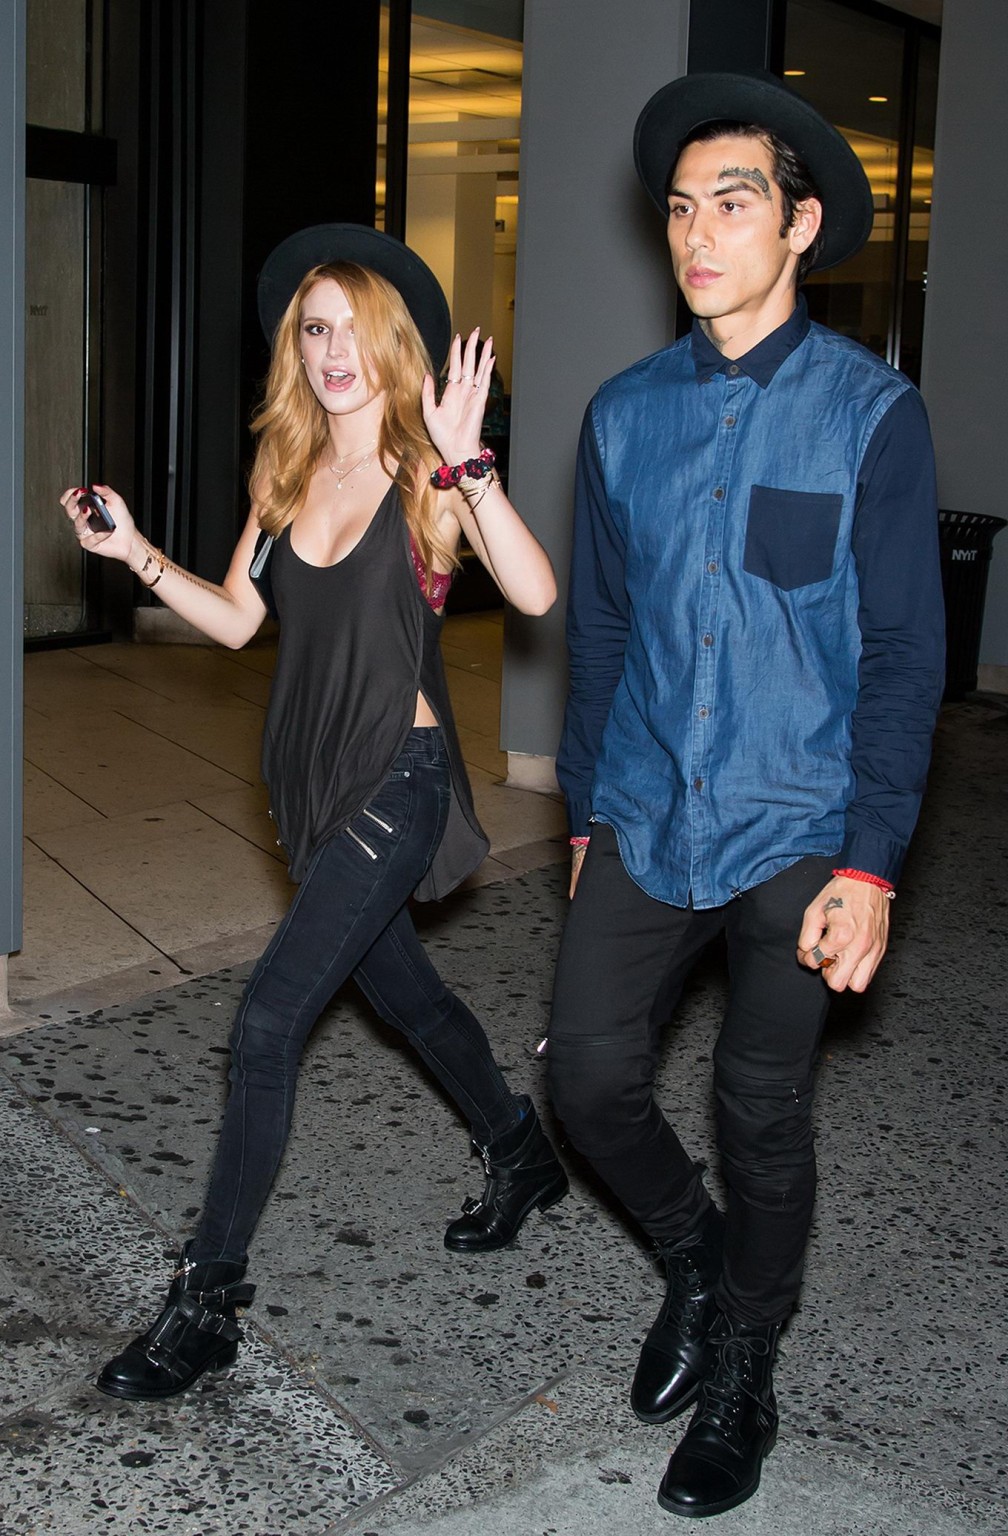 Bella Thorne showing big cleavage in a black top and tight jeans out in NYC #75185991